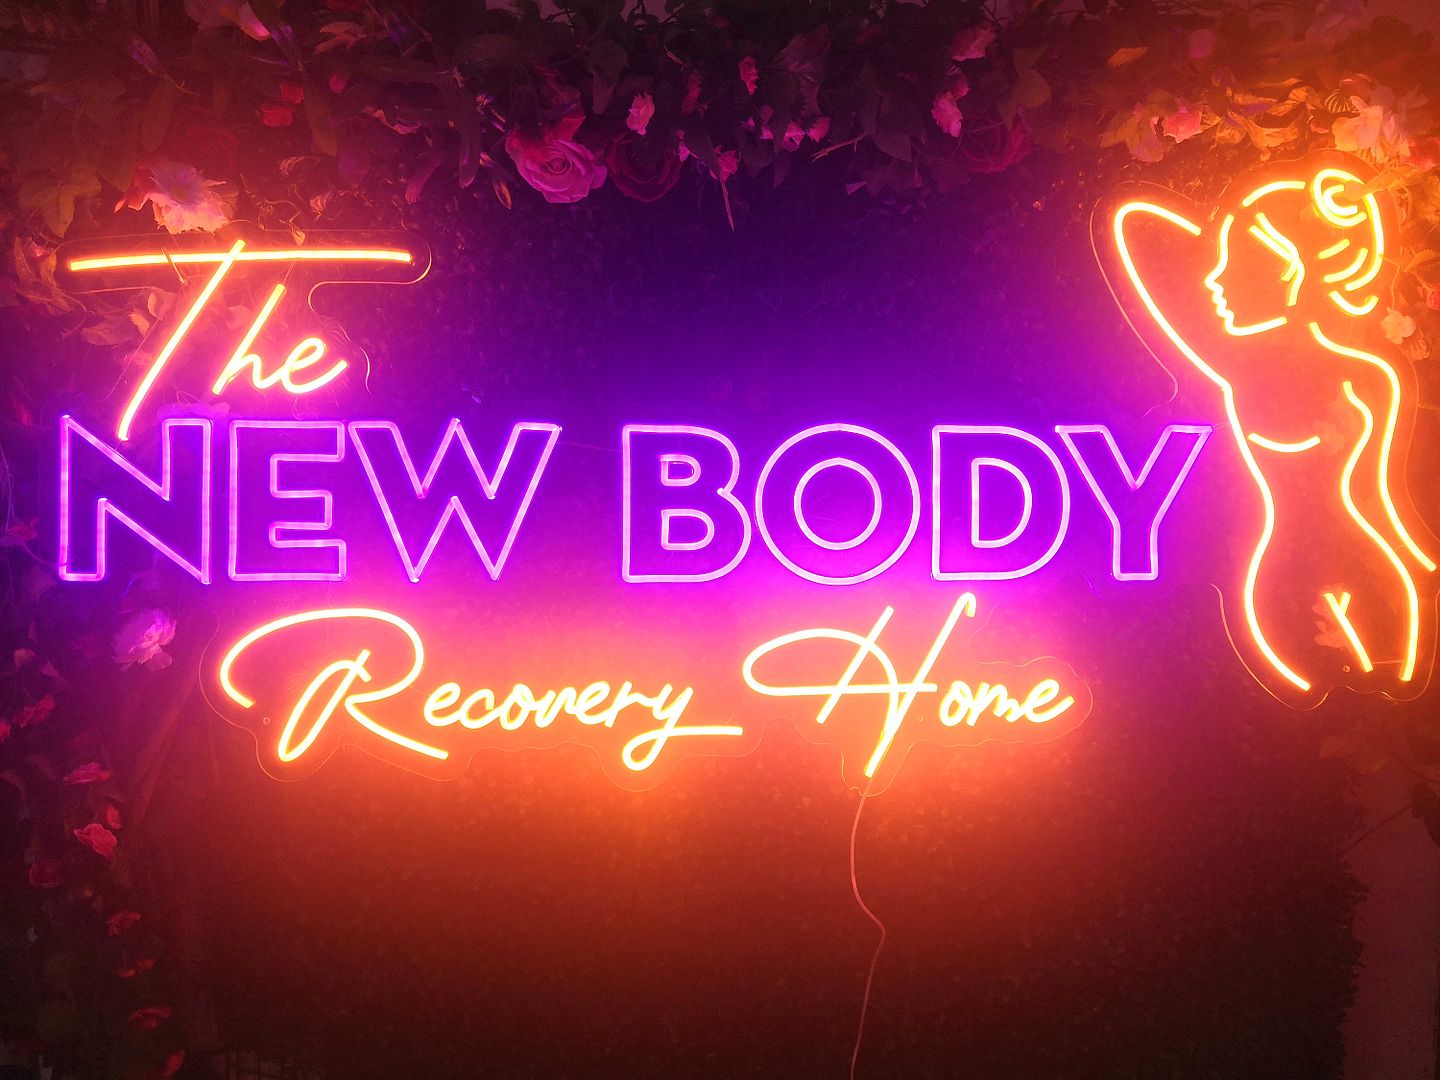 The New Body Recovery Home Neon Sign